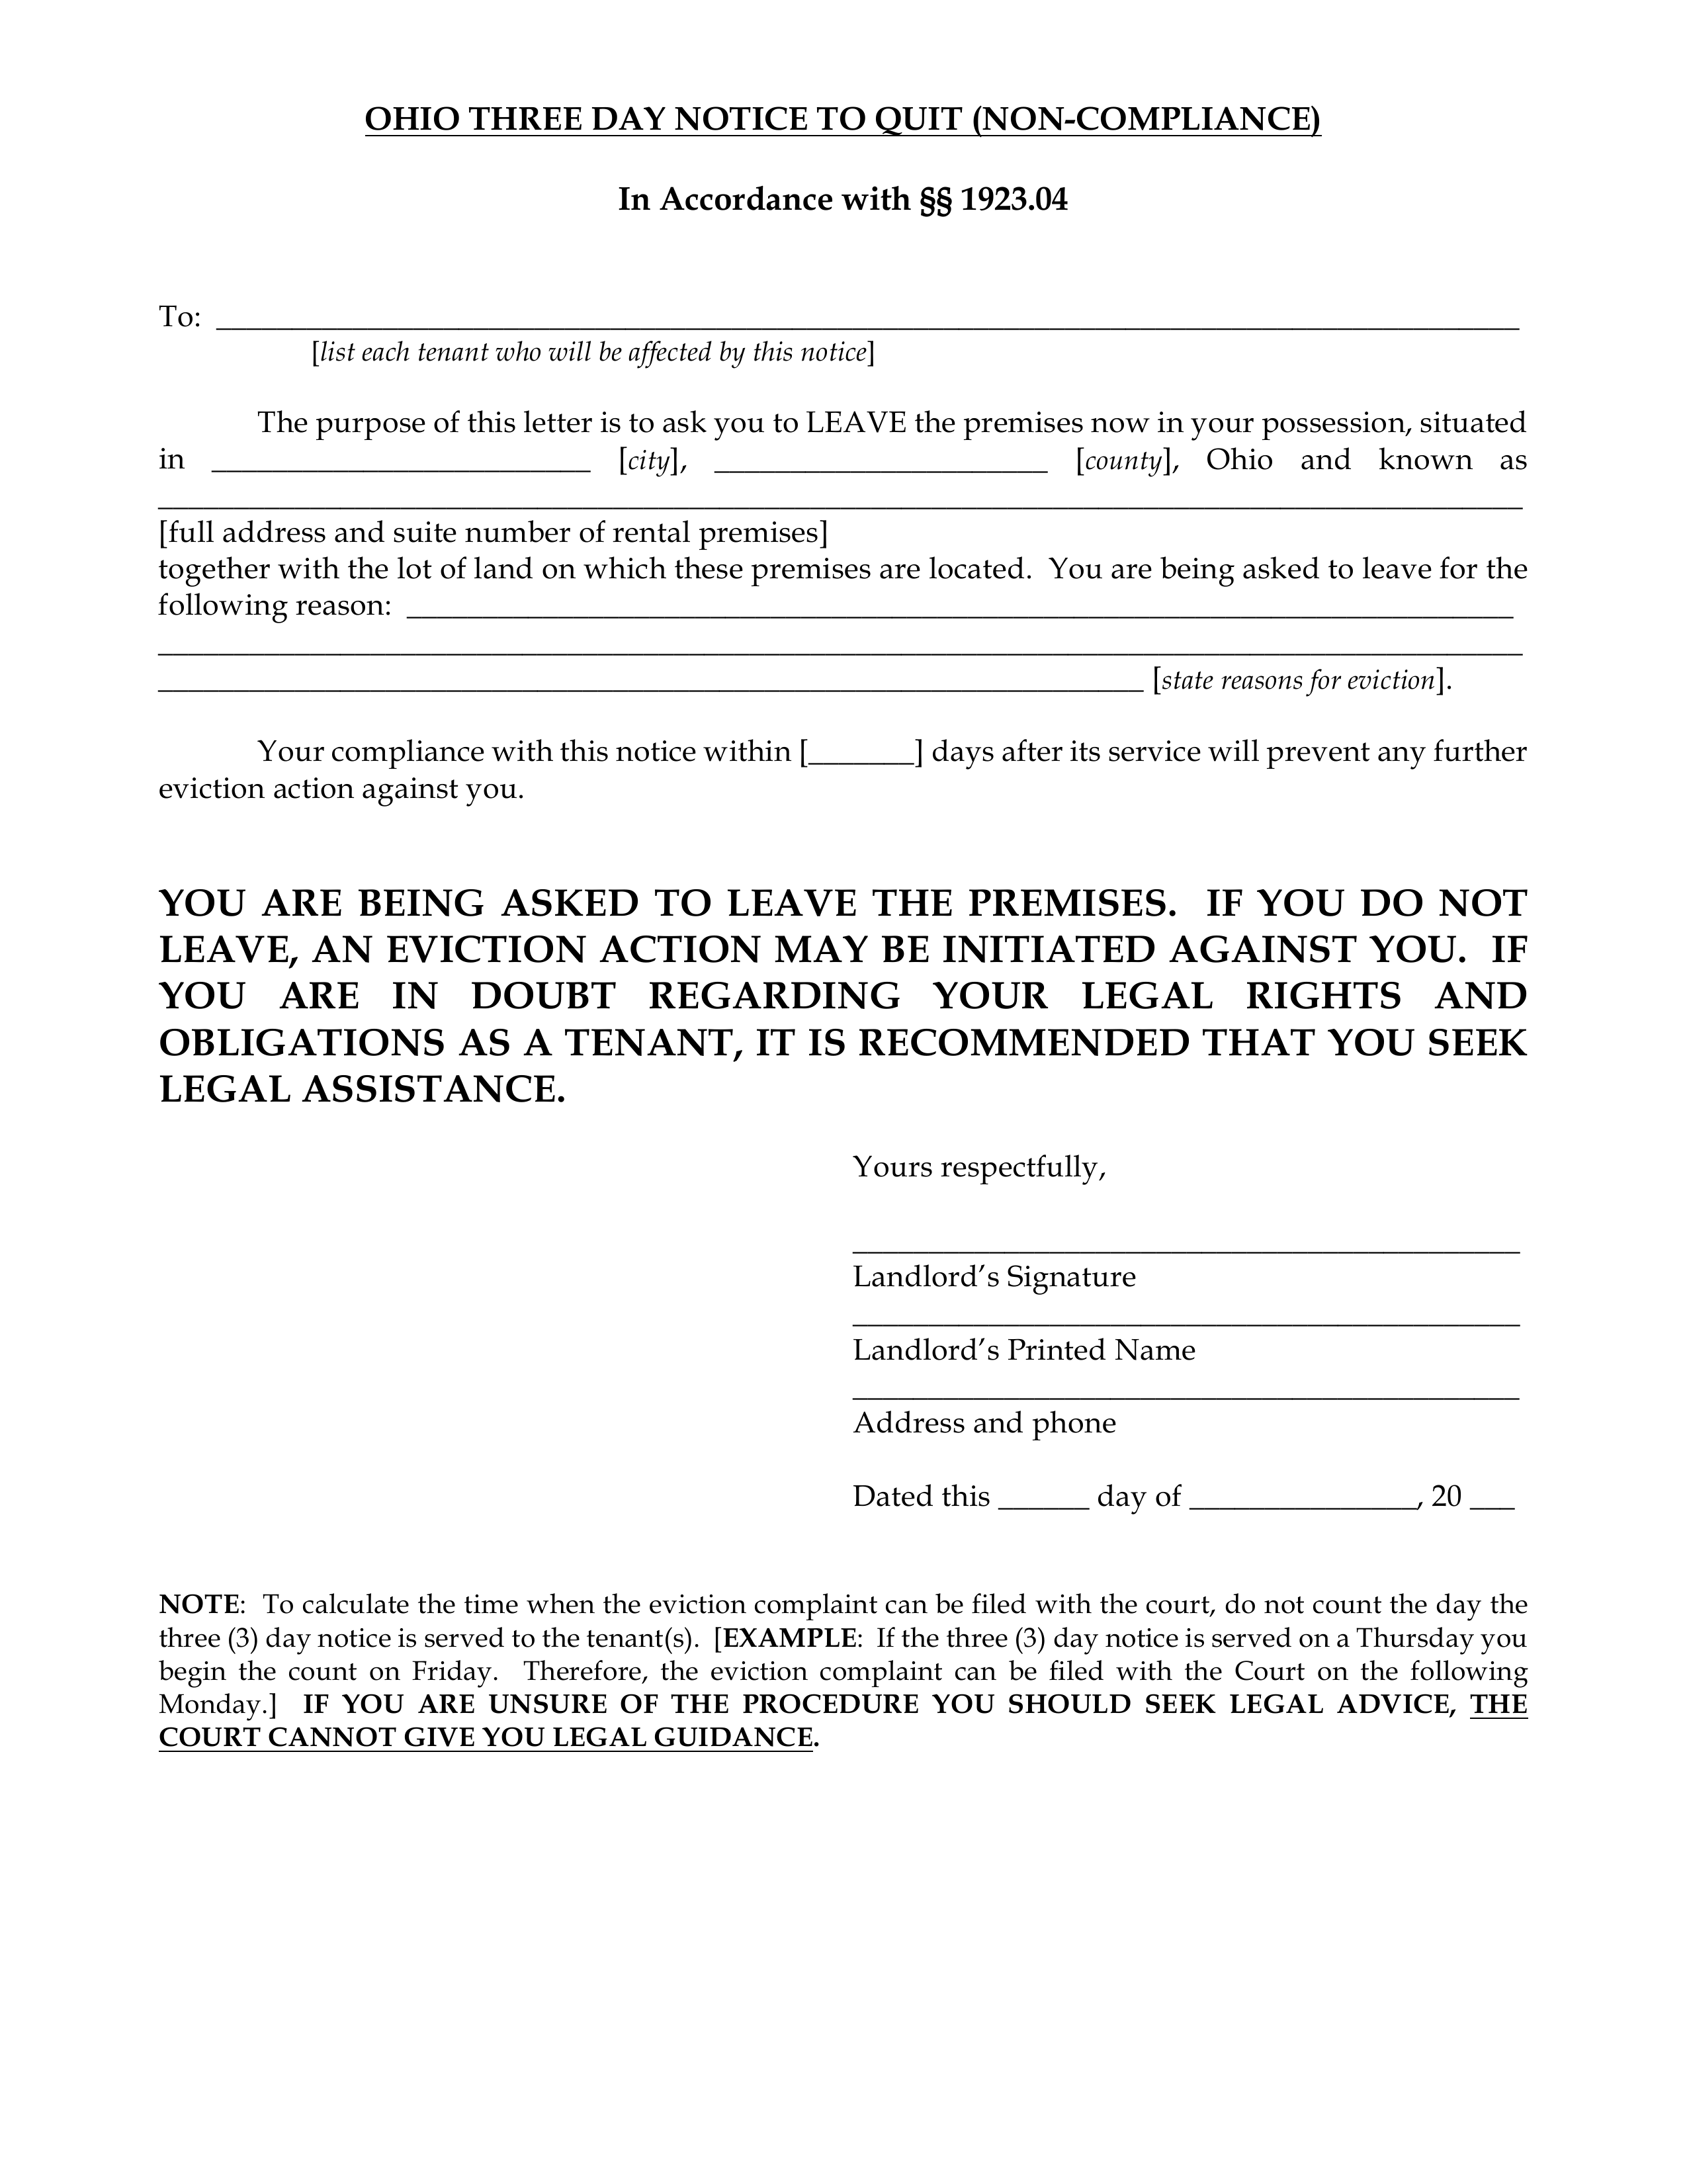 Ohio 3-Day Notice to Quit Form | Non-Compliance